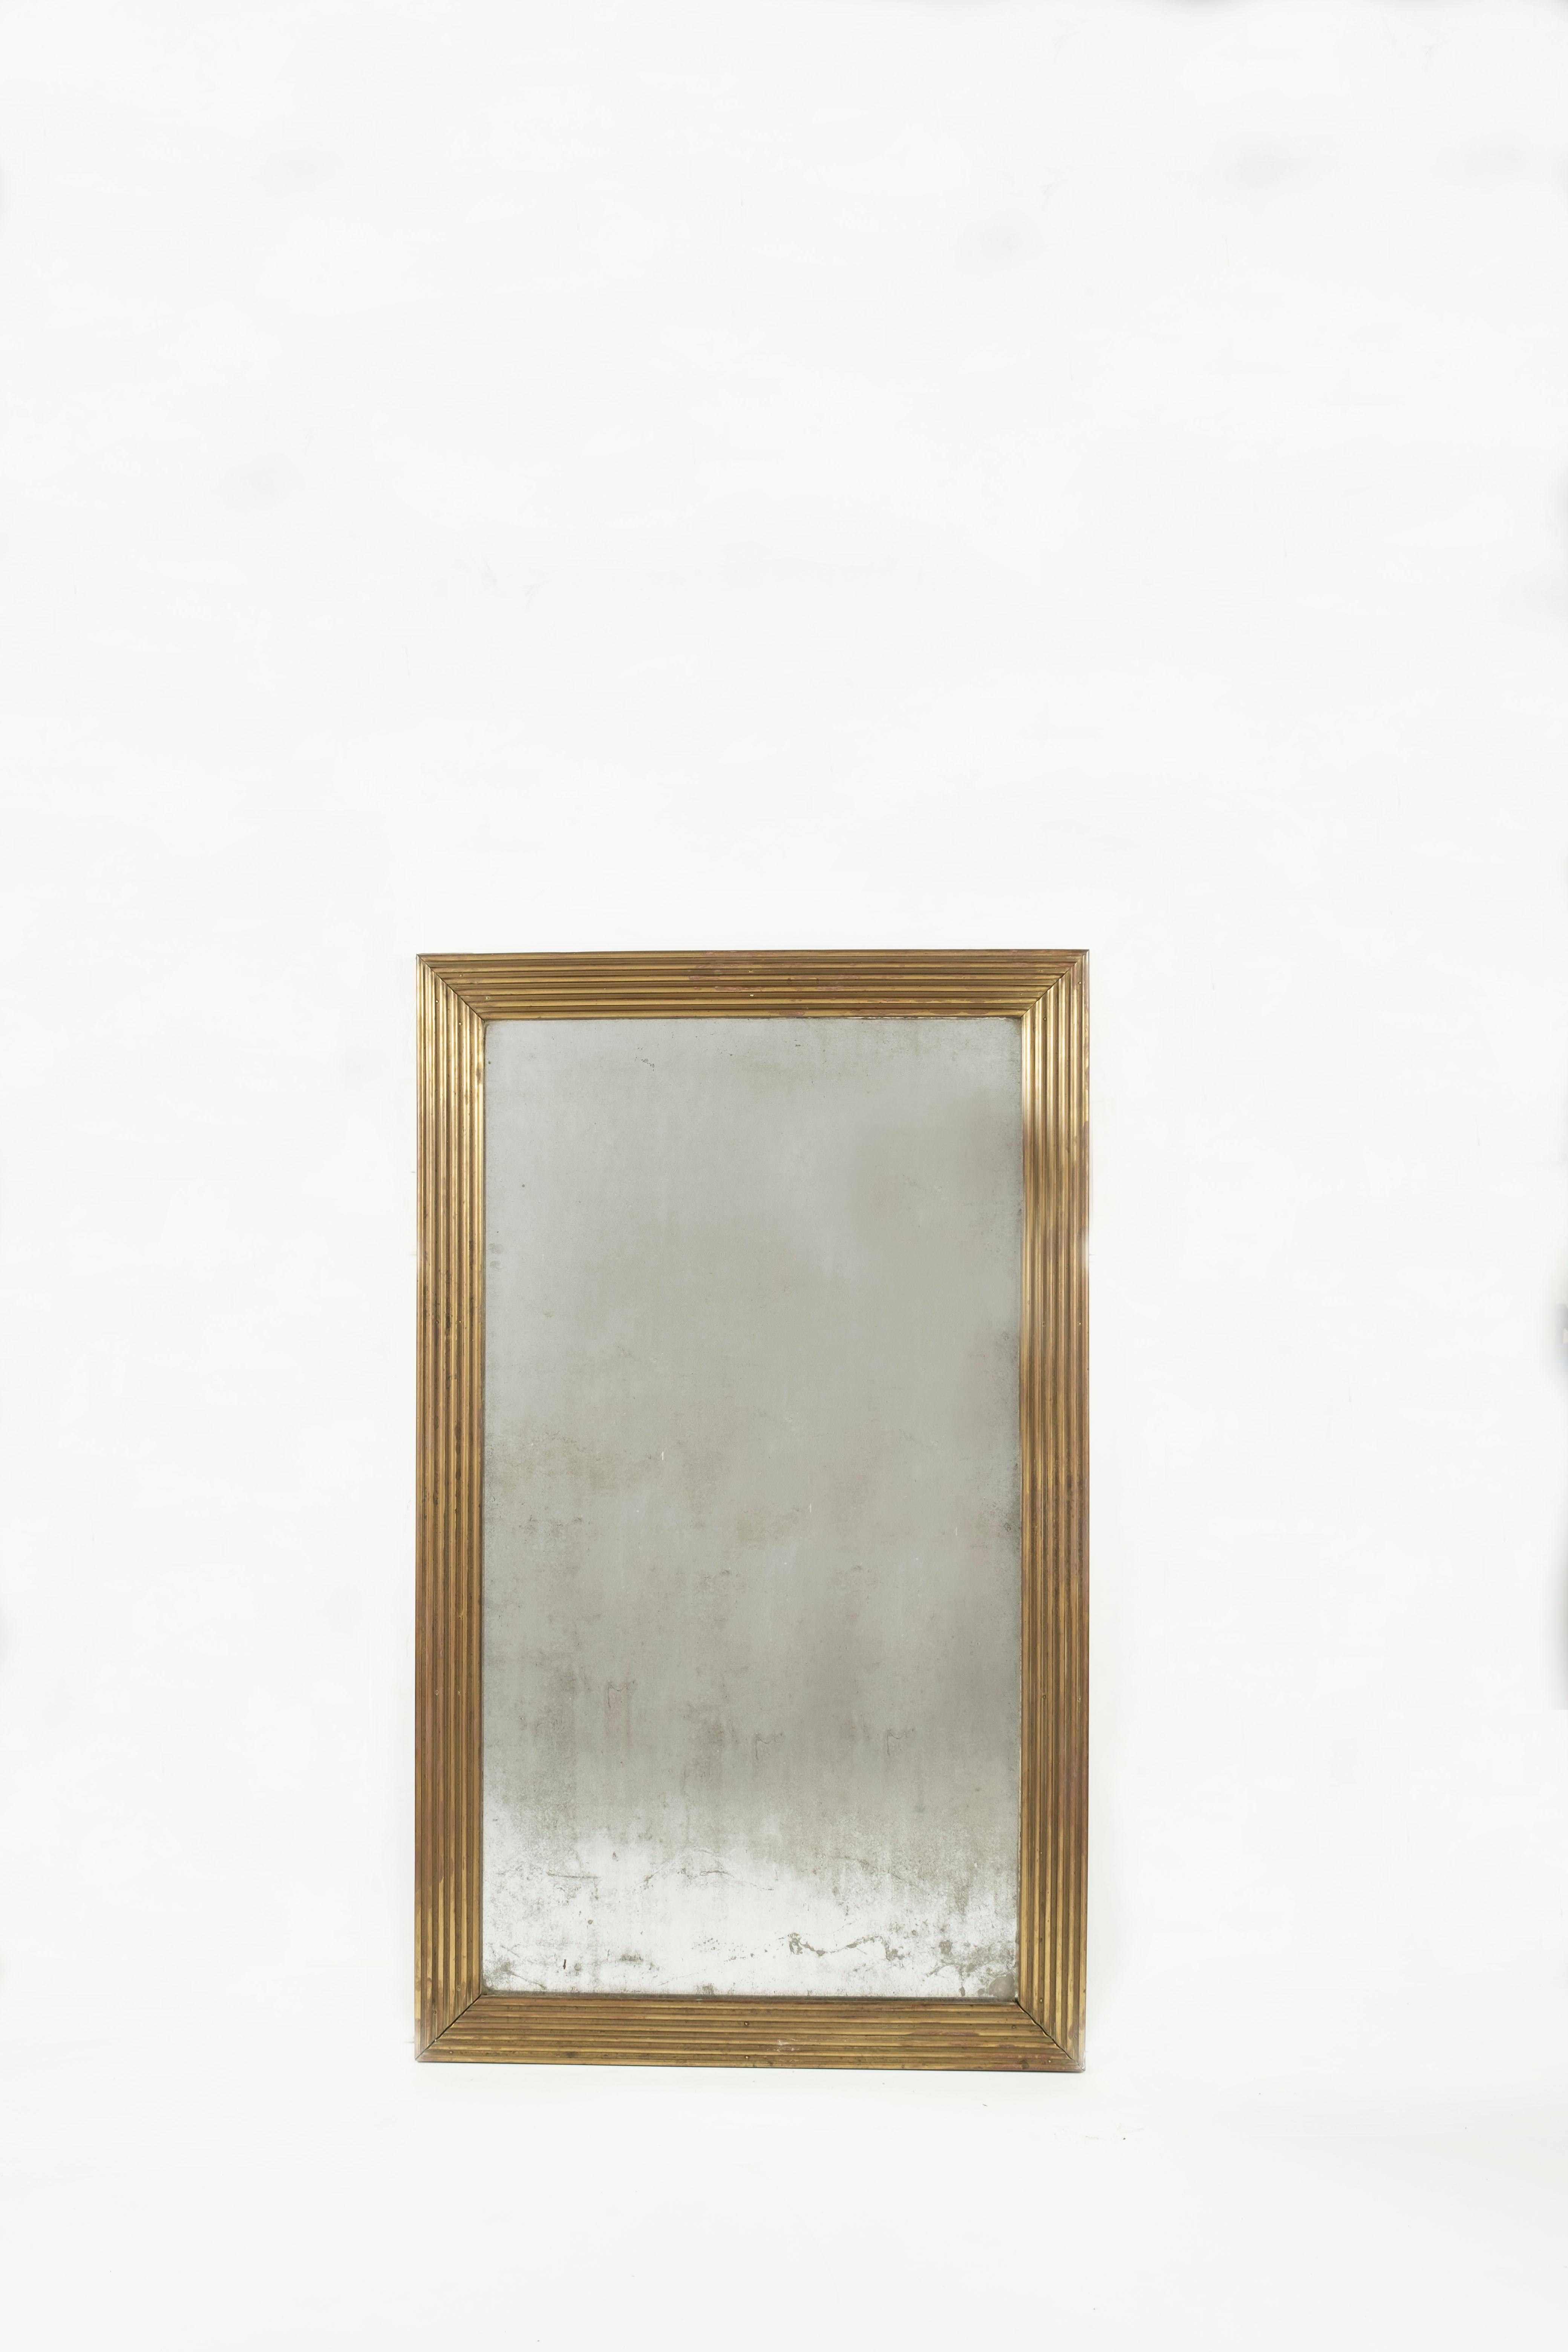 A fabulous tall late 19th-century French mirror crafted in a reeded brass frame with wonderful minimalist lines, notable features include original mercury mirror plate.